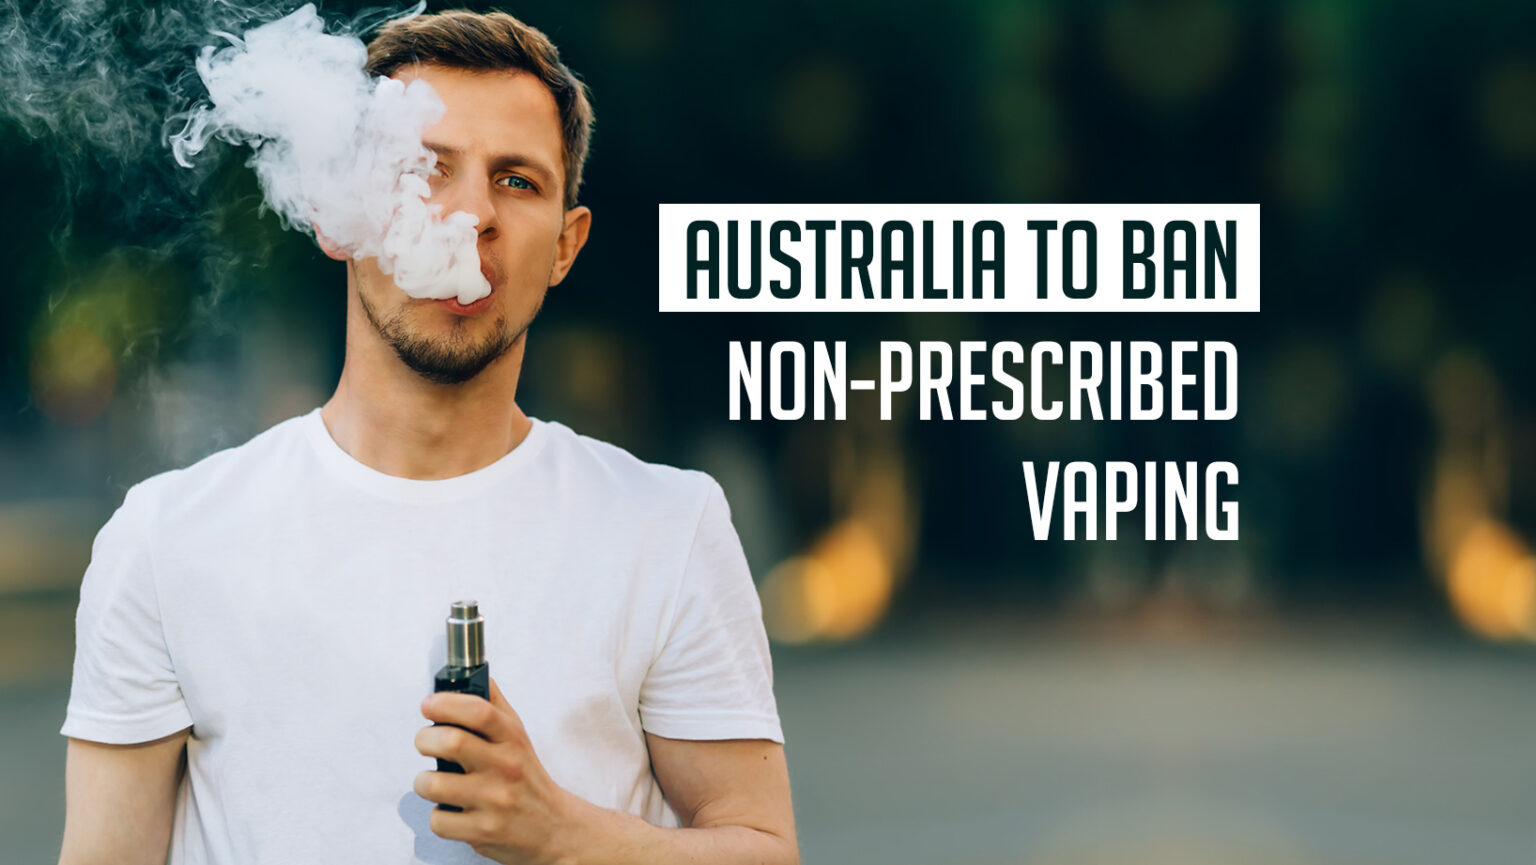 Australia To Ban Non-Prescribed Vaping.The upside down stance on vaping gets stricter with numerous bans.